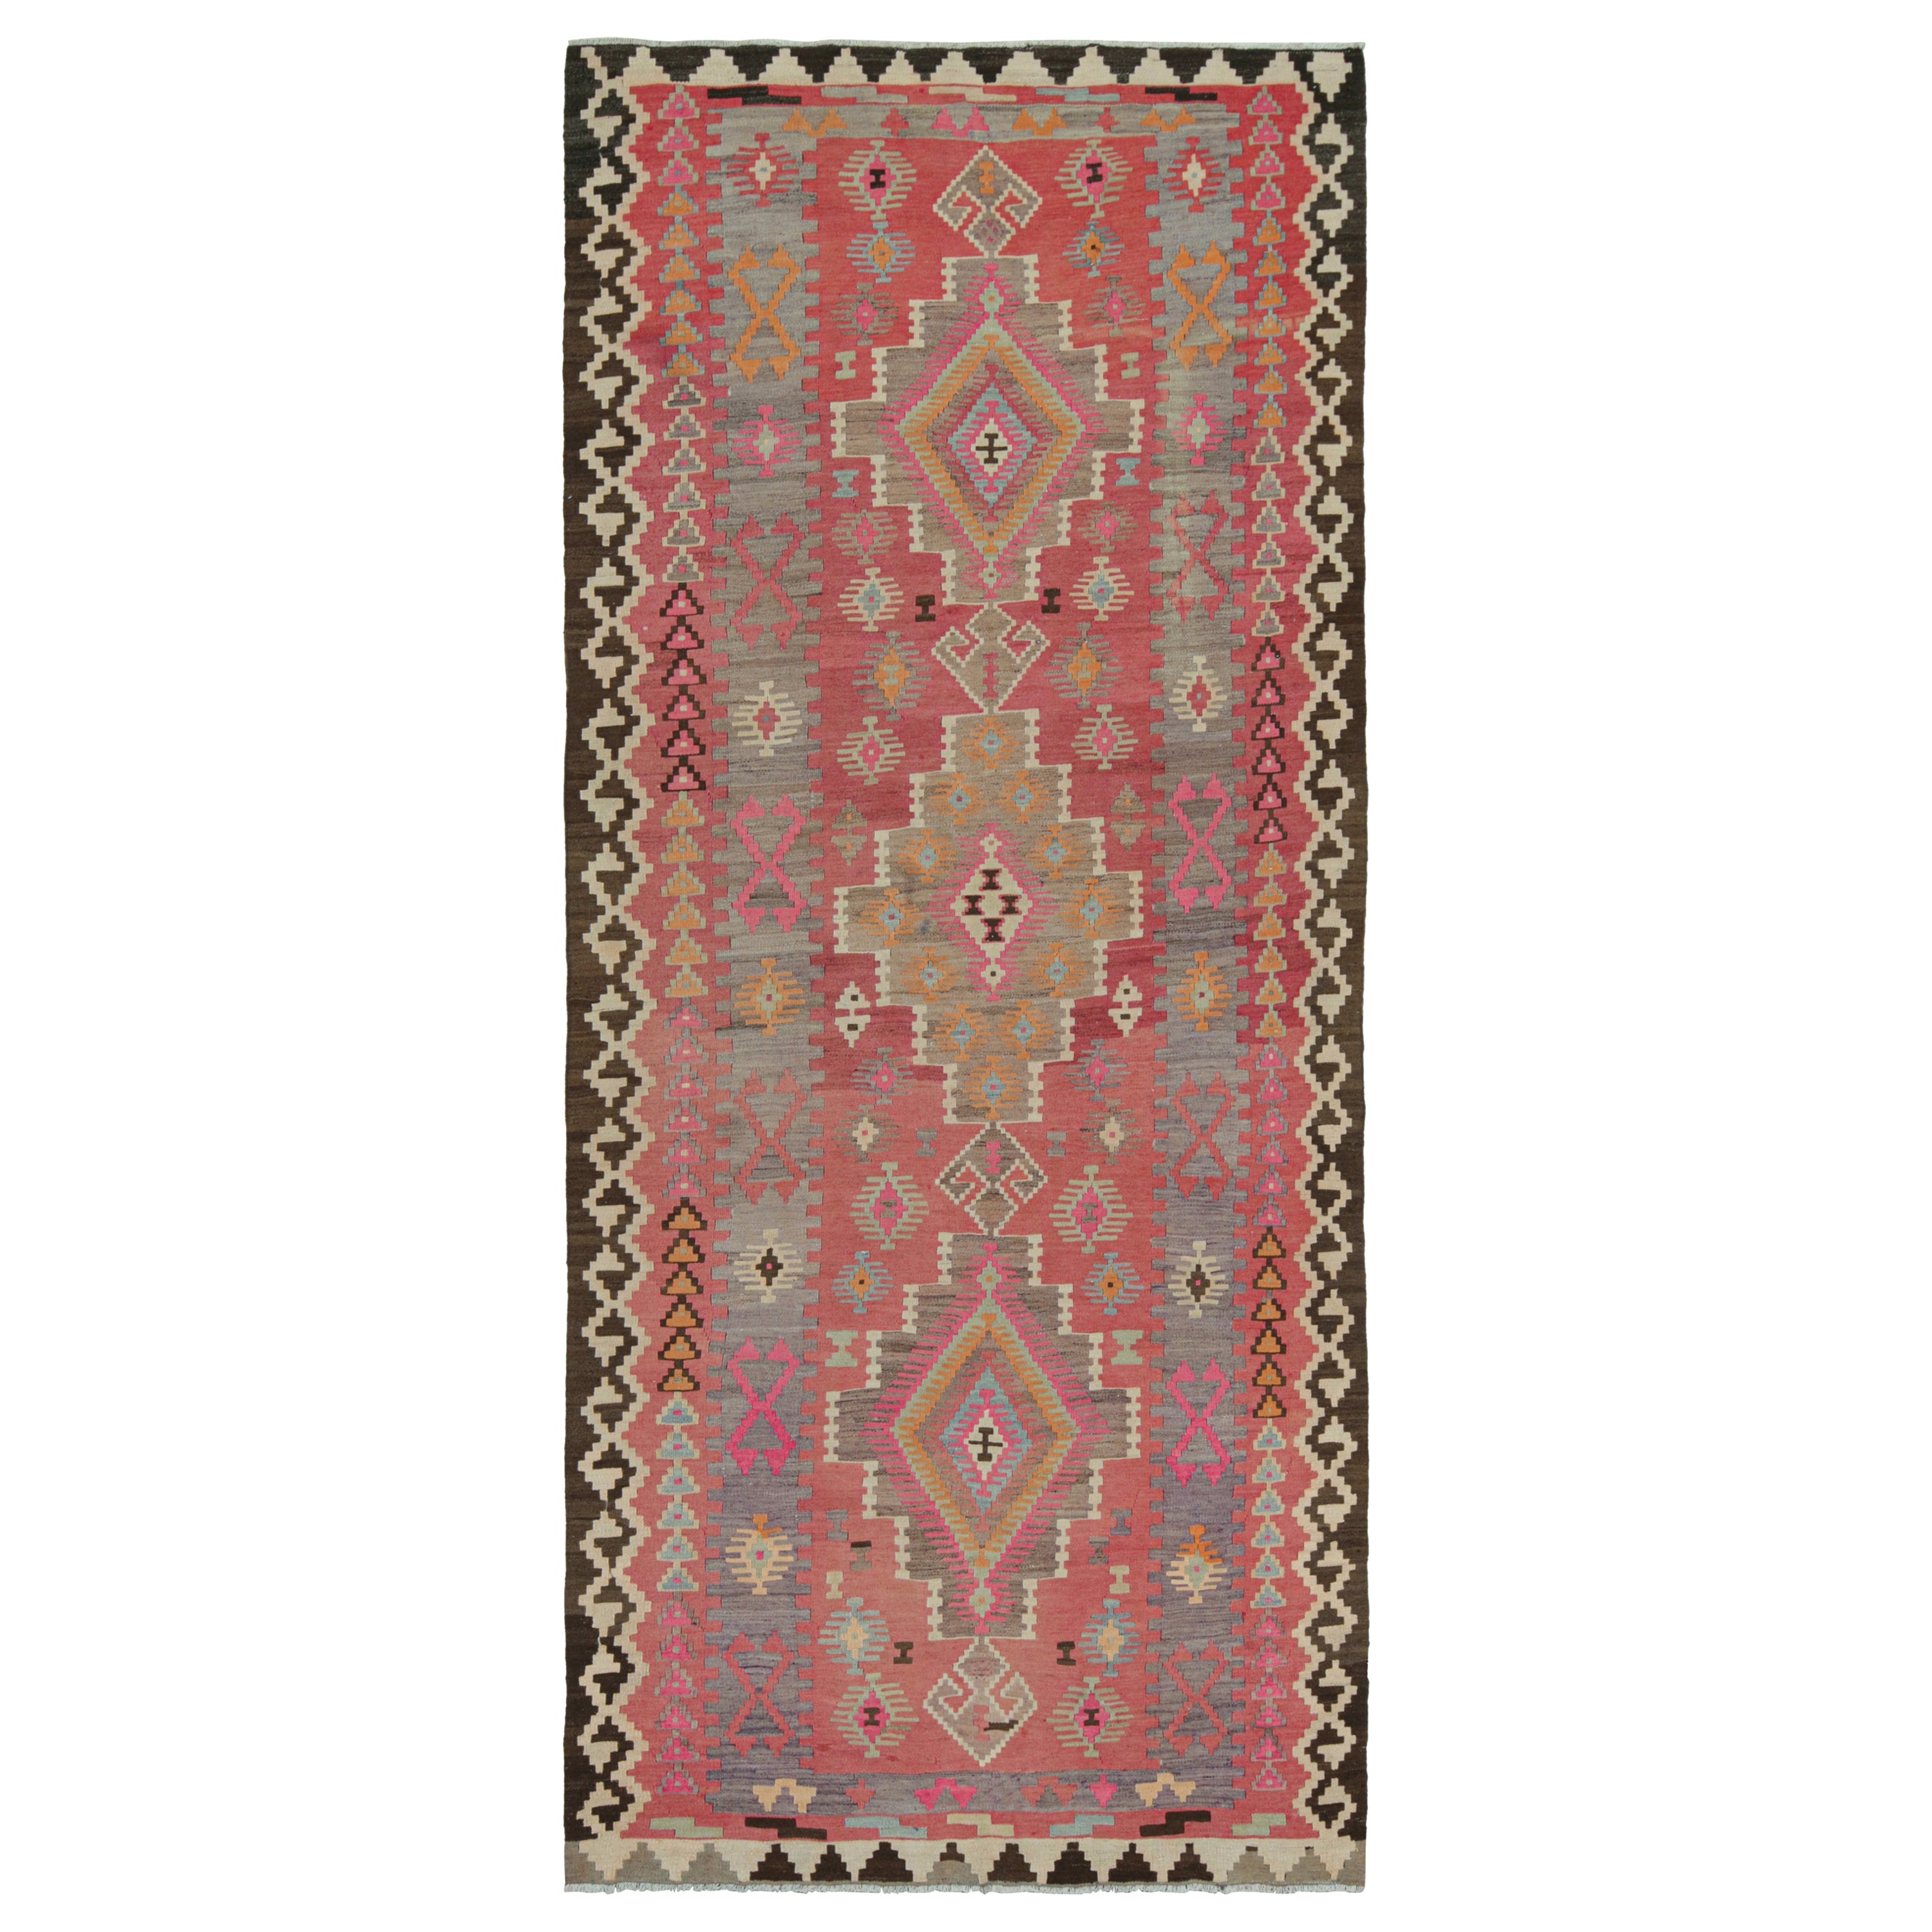 Vintage Northwest Persian Kilim in Salmon with Medallions